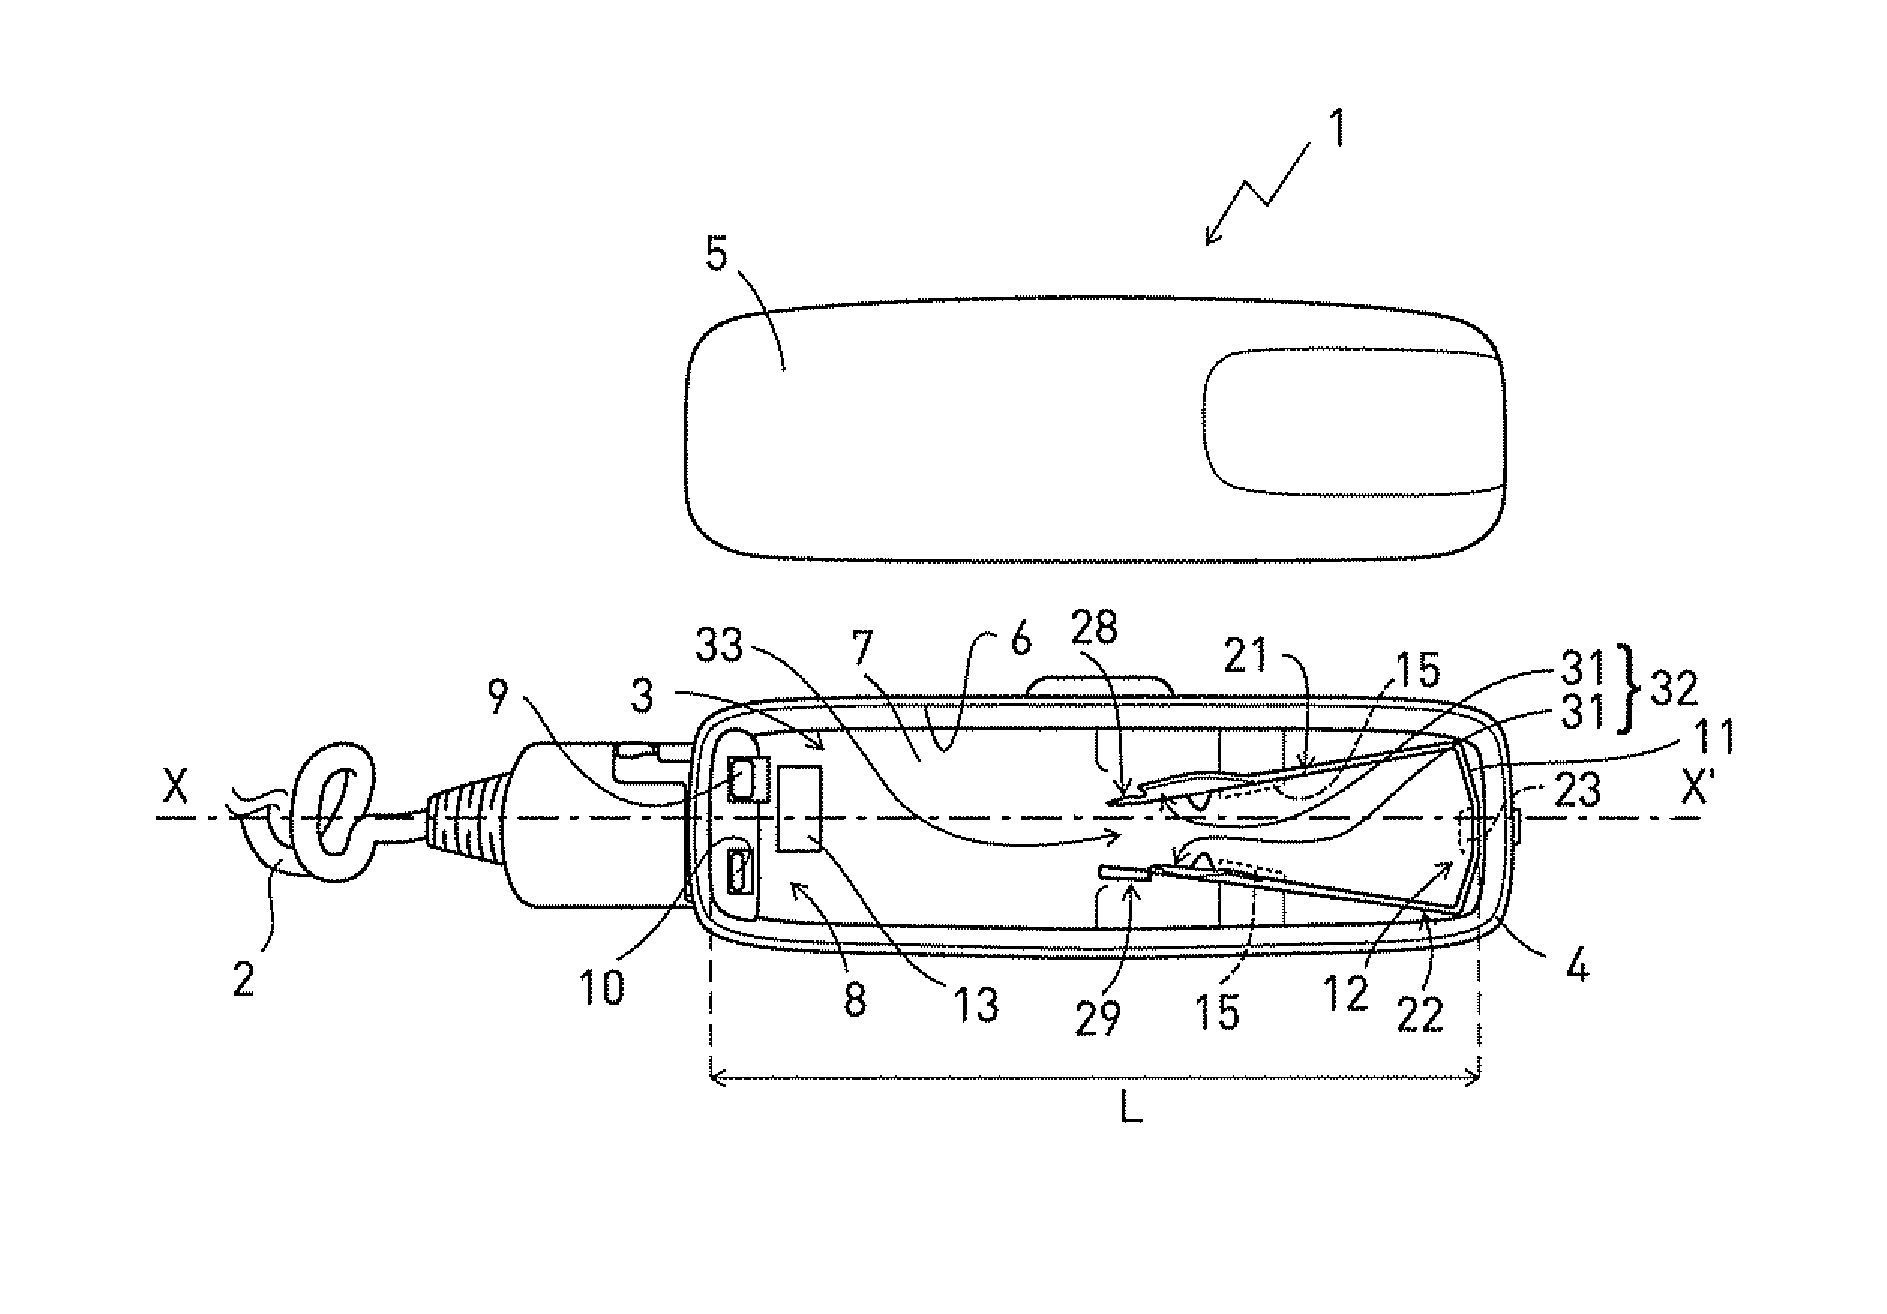 Device for electric power supply of a portable lamp